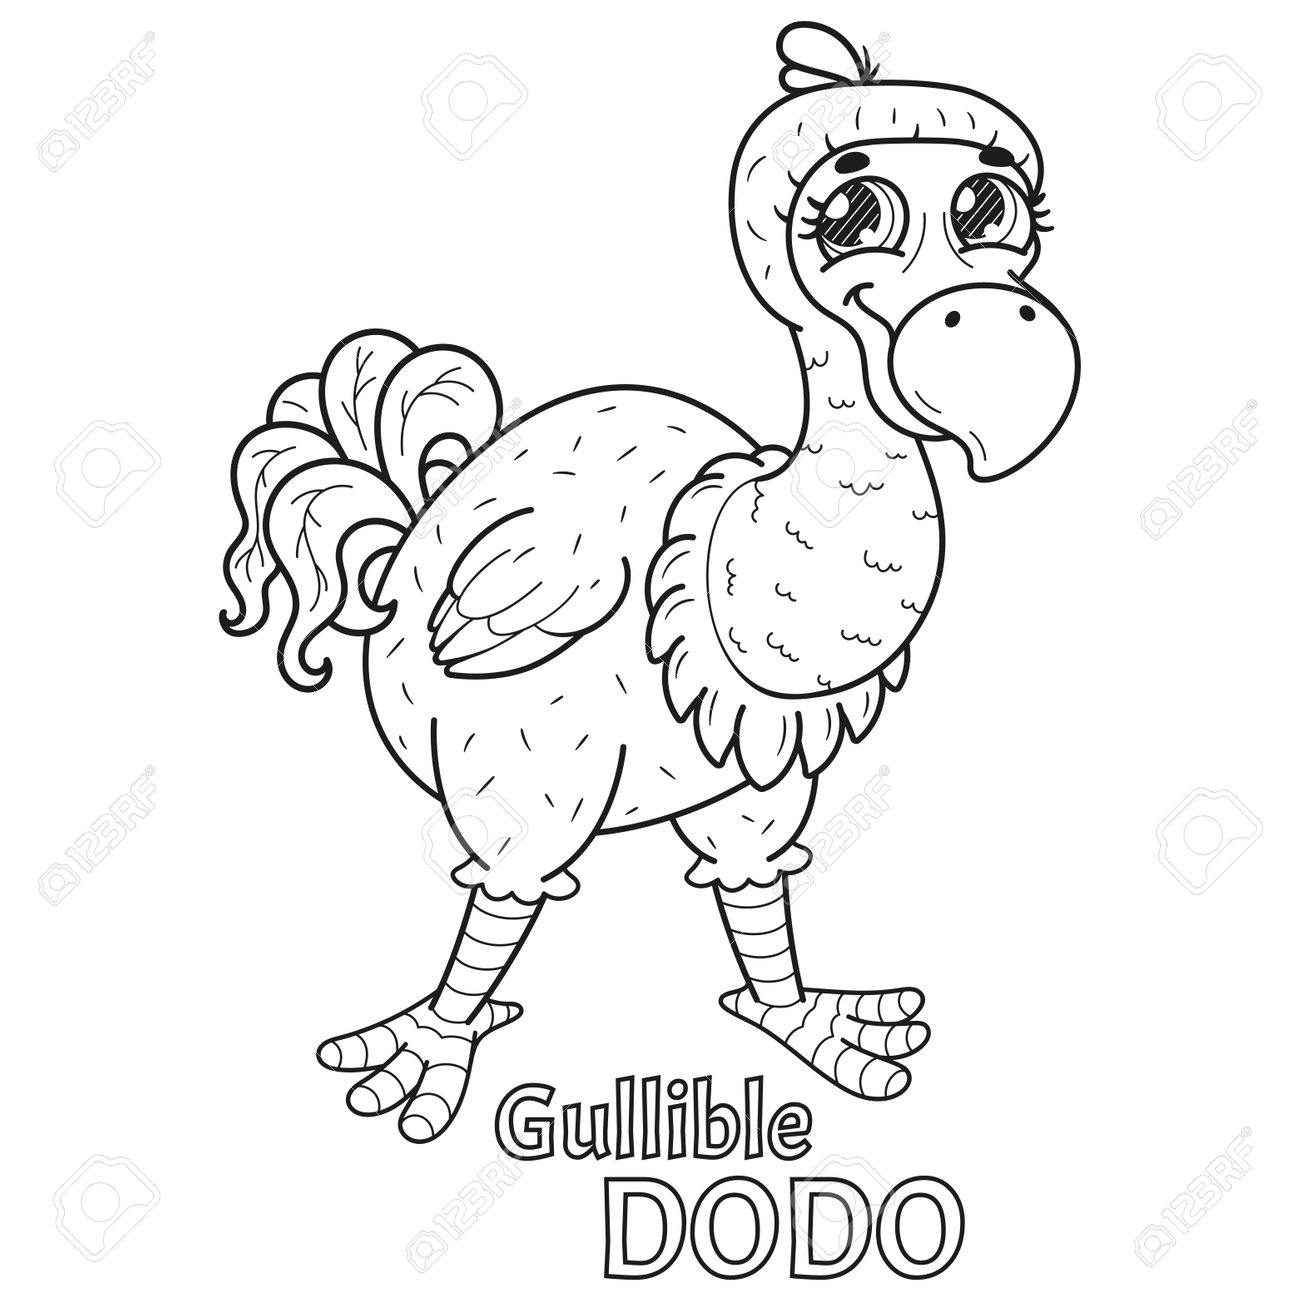 Childrens simple coloring book with a dodo bird royalty free svg cliparts vectors and stock illustration image